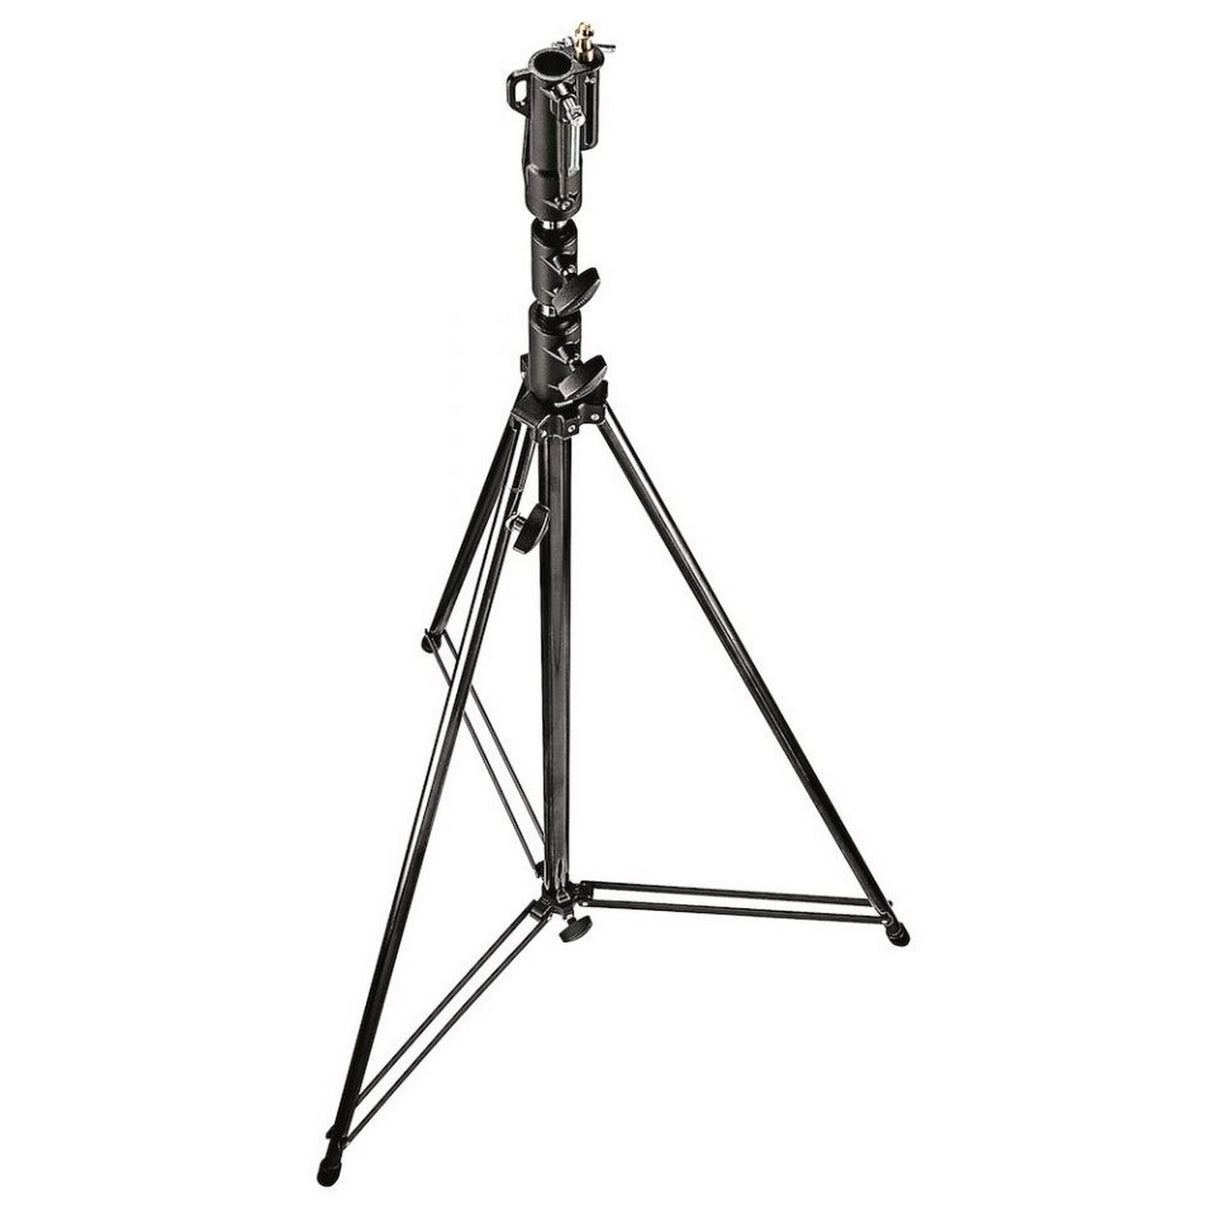 Manfrotto 111BSU Black Tall 3-Section Cine Stand with Leveling Leg